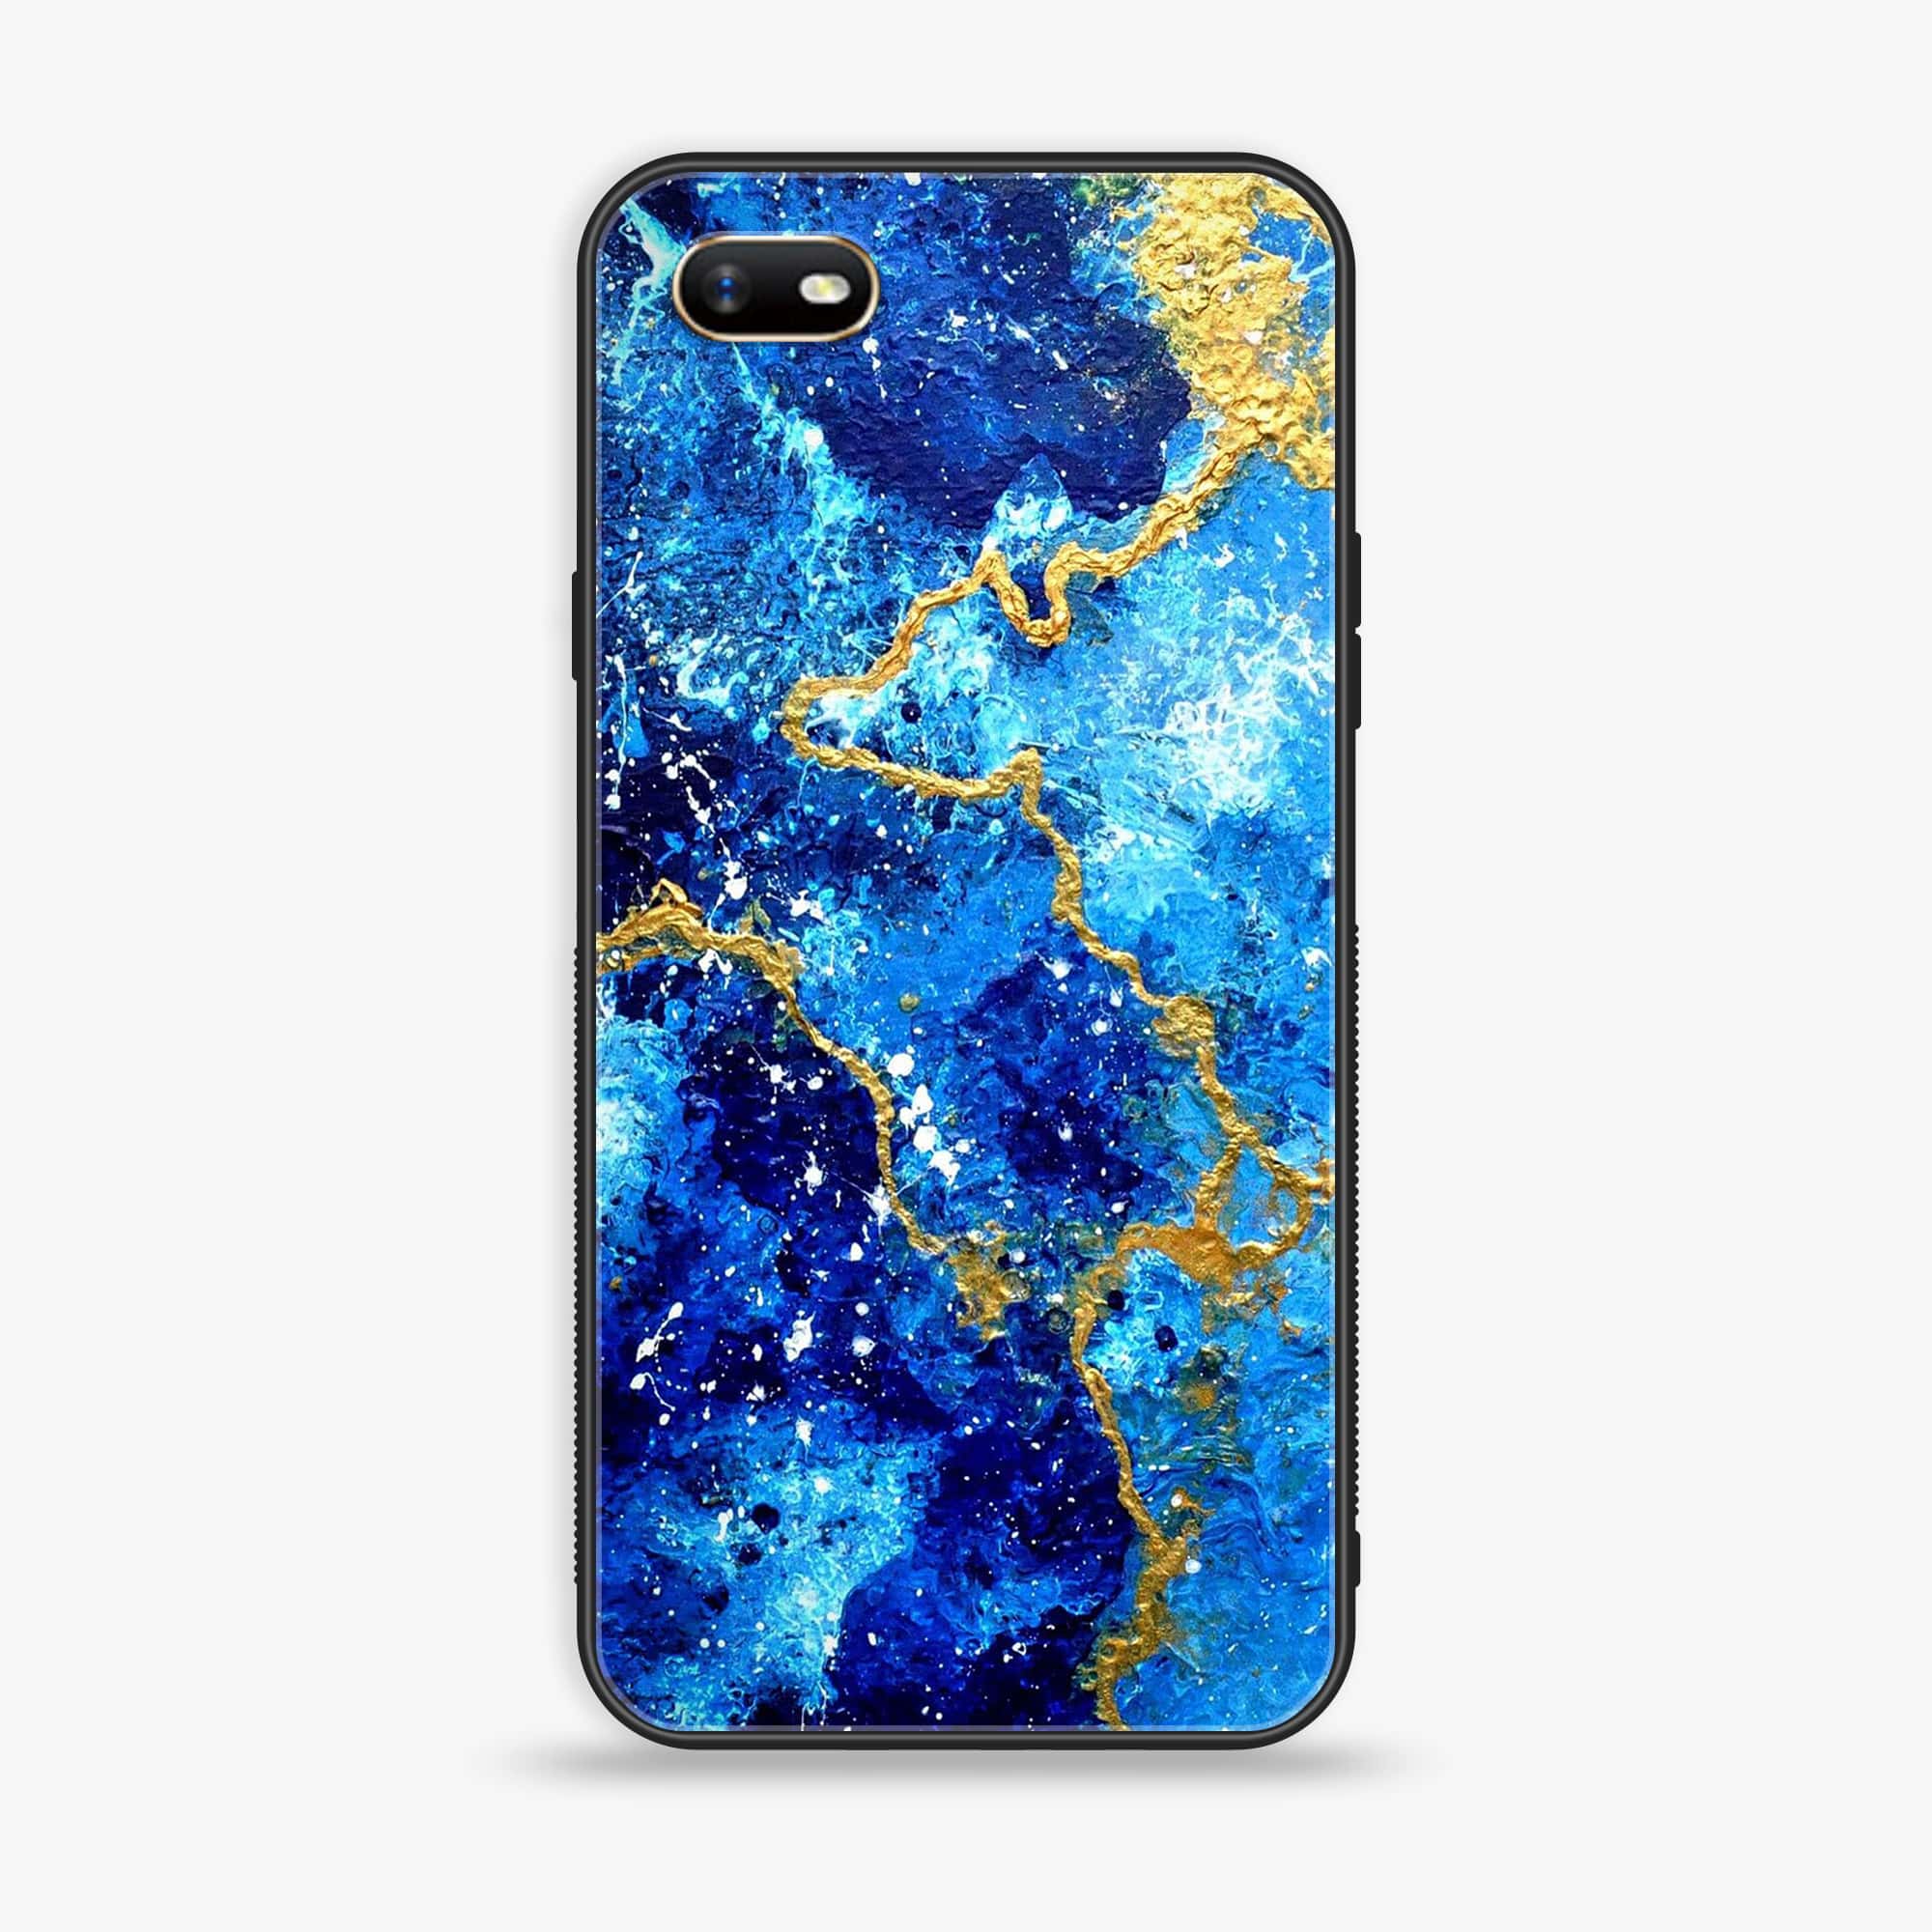 Oppo A1k - Blue Marble 2.0 Series - Premium Printed Glass soft Bumper shock Proof Case